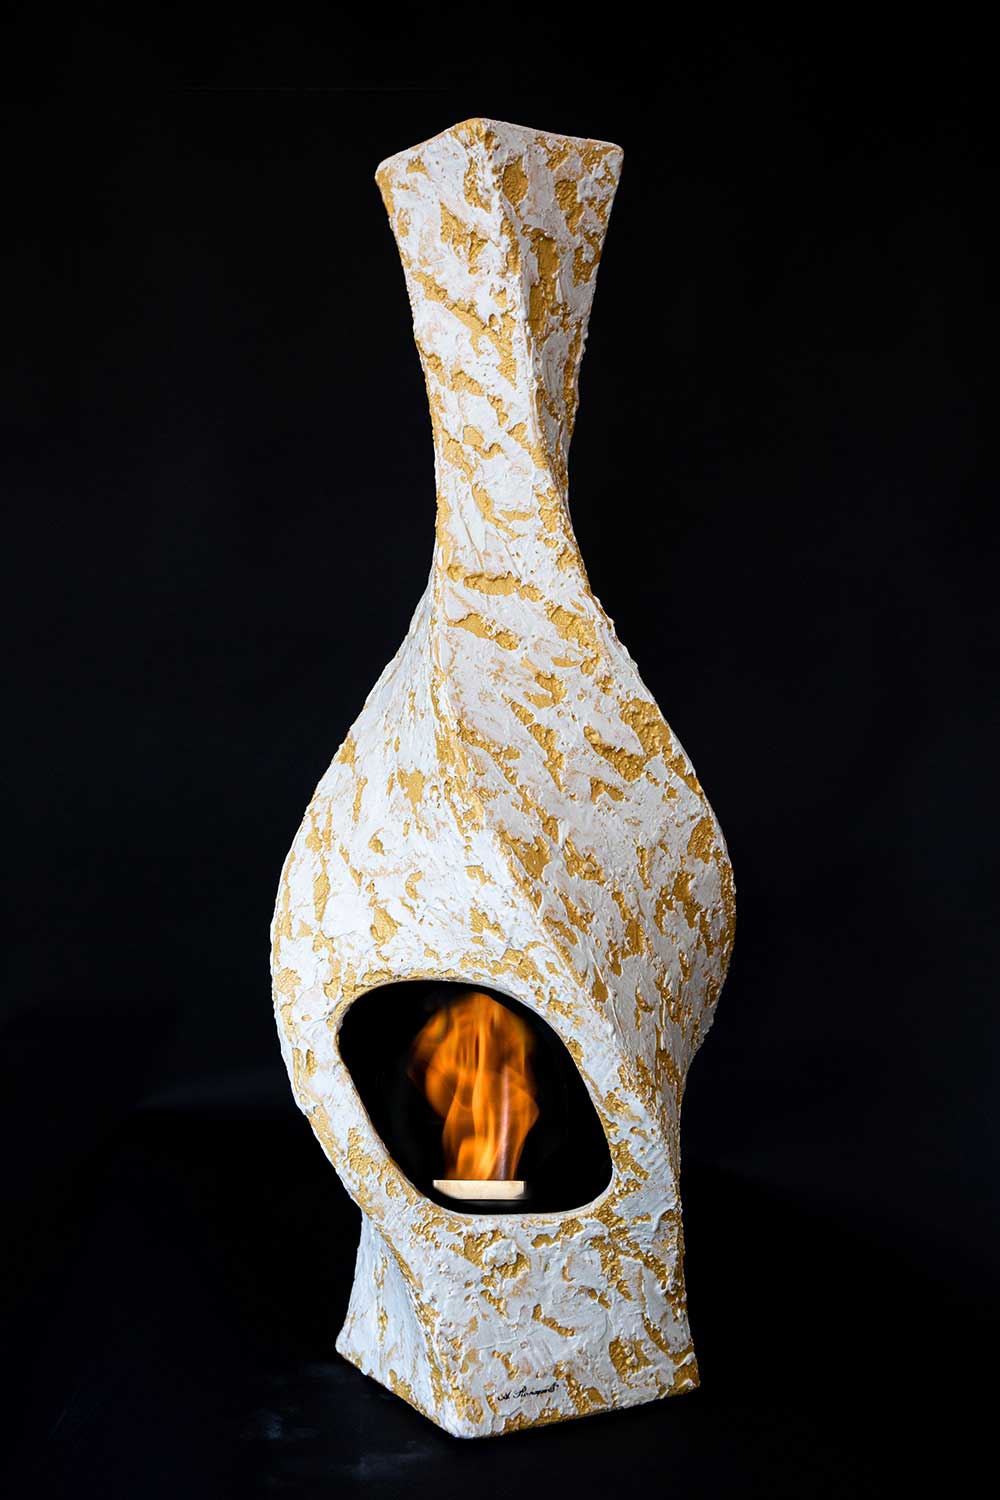 Torcilione - Handcrafted and artistic bio-fireplace  made in eco-mortar